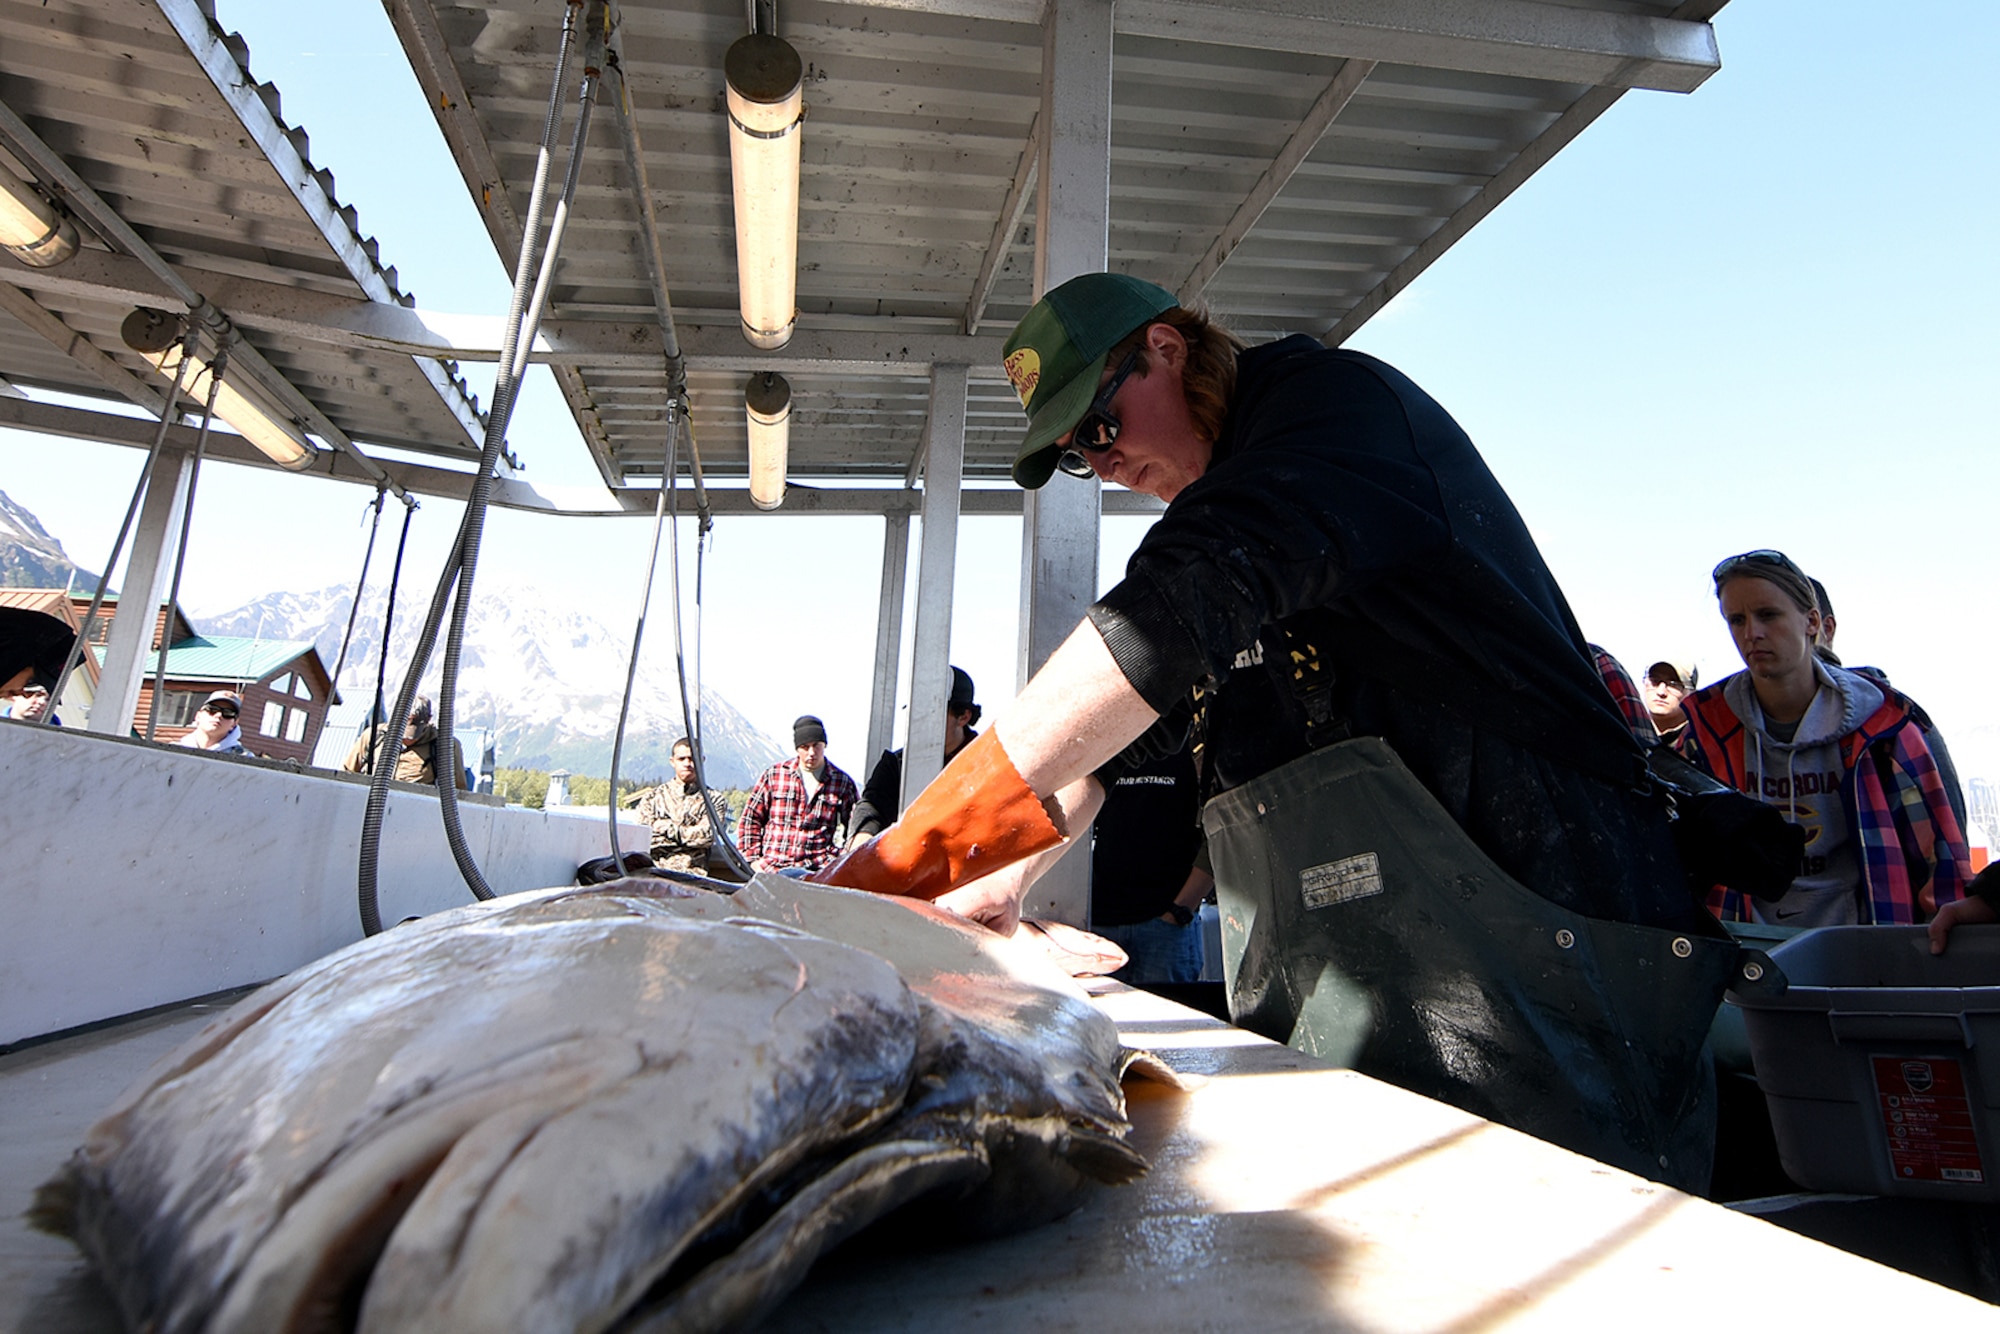 Volunteer deck hand Kyle Collins goes to work filleting a large halibut caught during the 10th Annual Armed Services Combat Fishing Tournament in Seward, Alaska, May 26. The tournament, hosted by the city of Seward and the Armed Services YMCA, gave more than 200 military anglers stationed in Alaska a free day of halibut fishing to thank them for their service. (U.S. Army photo by John Pennell)